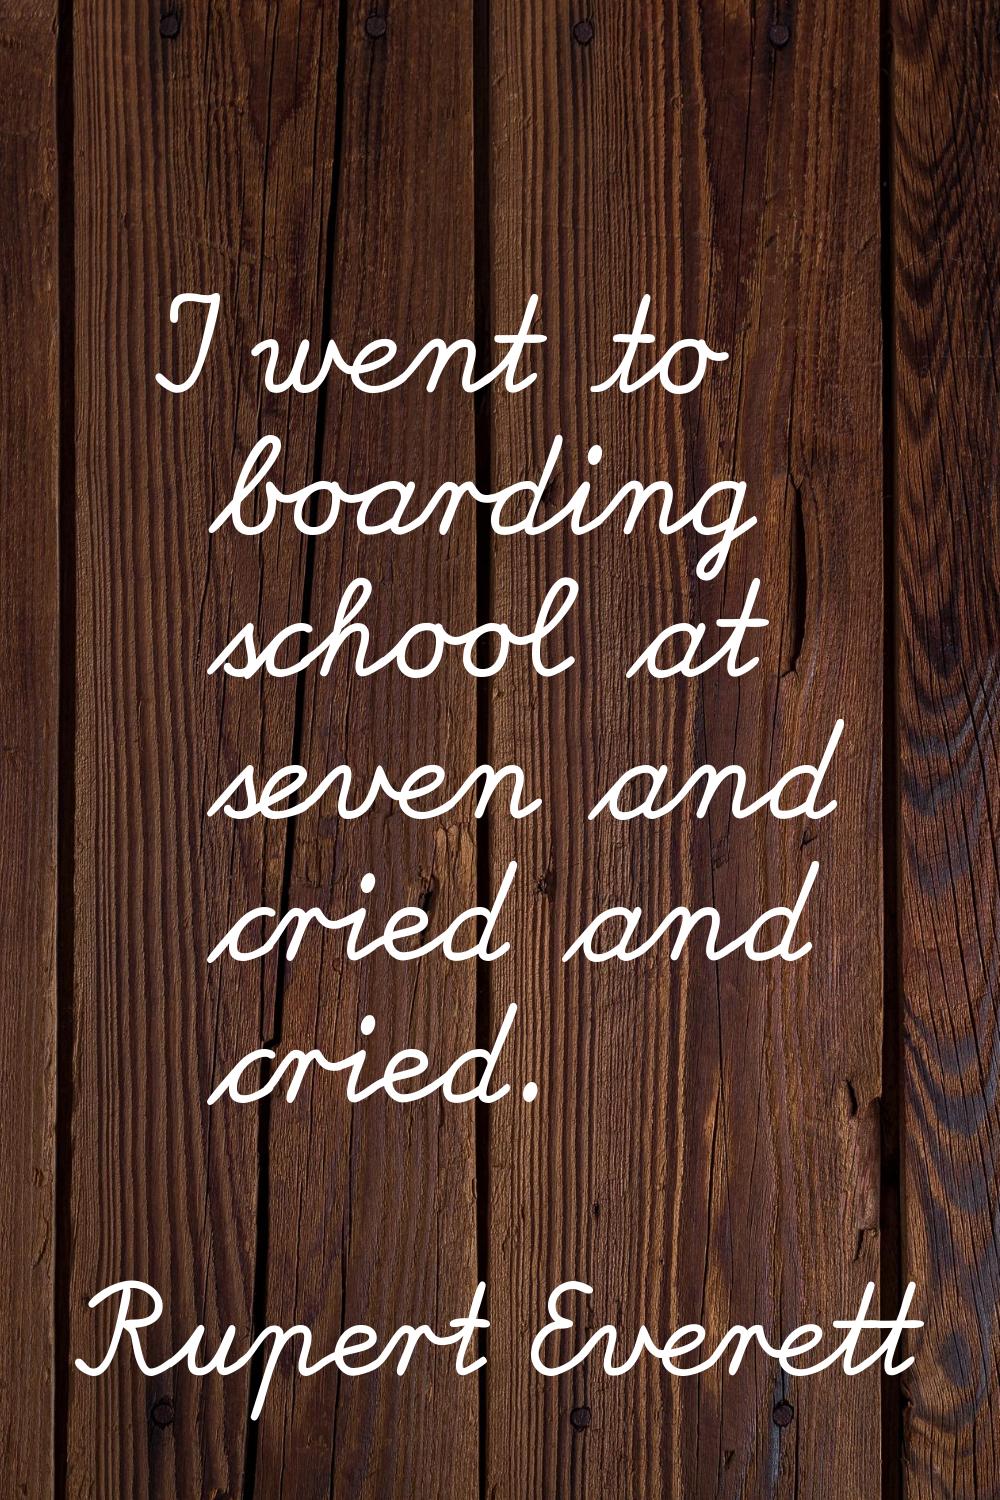 I went to boarding school at seven and cried and cried.